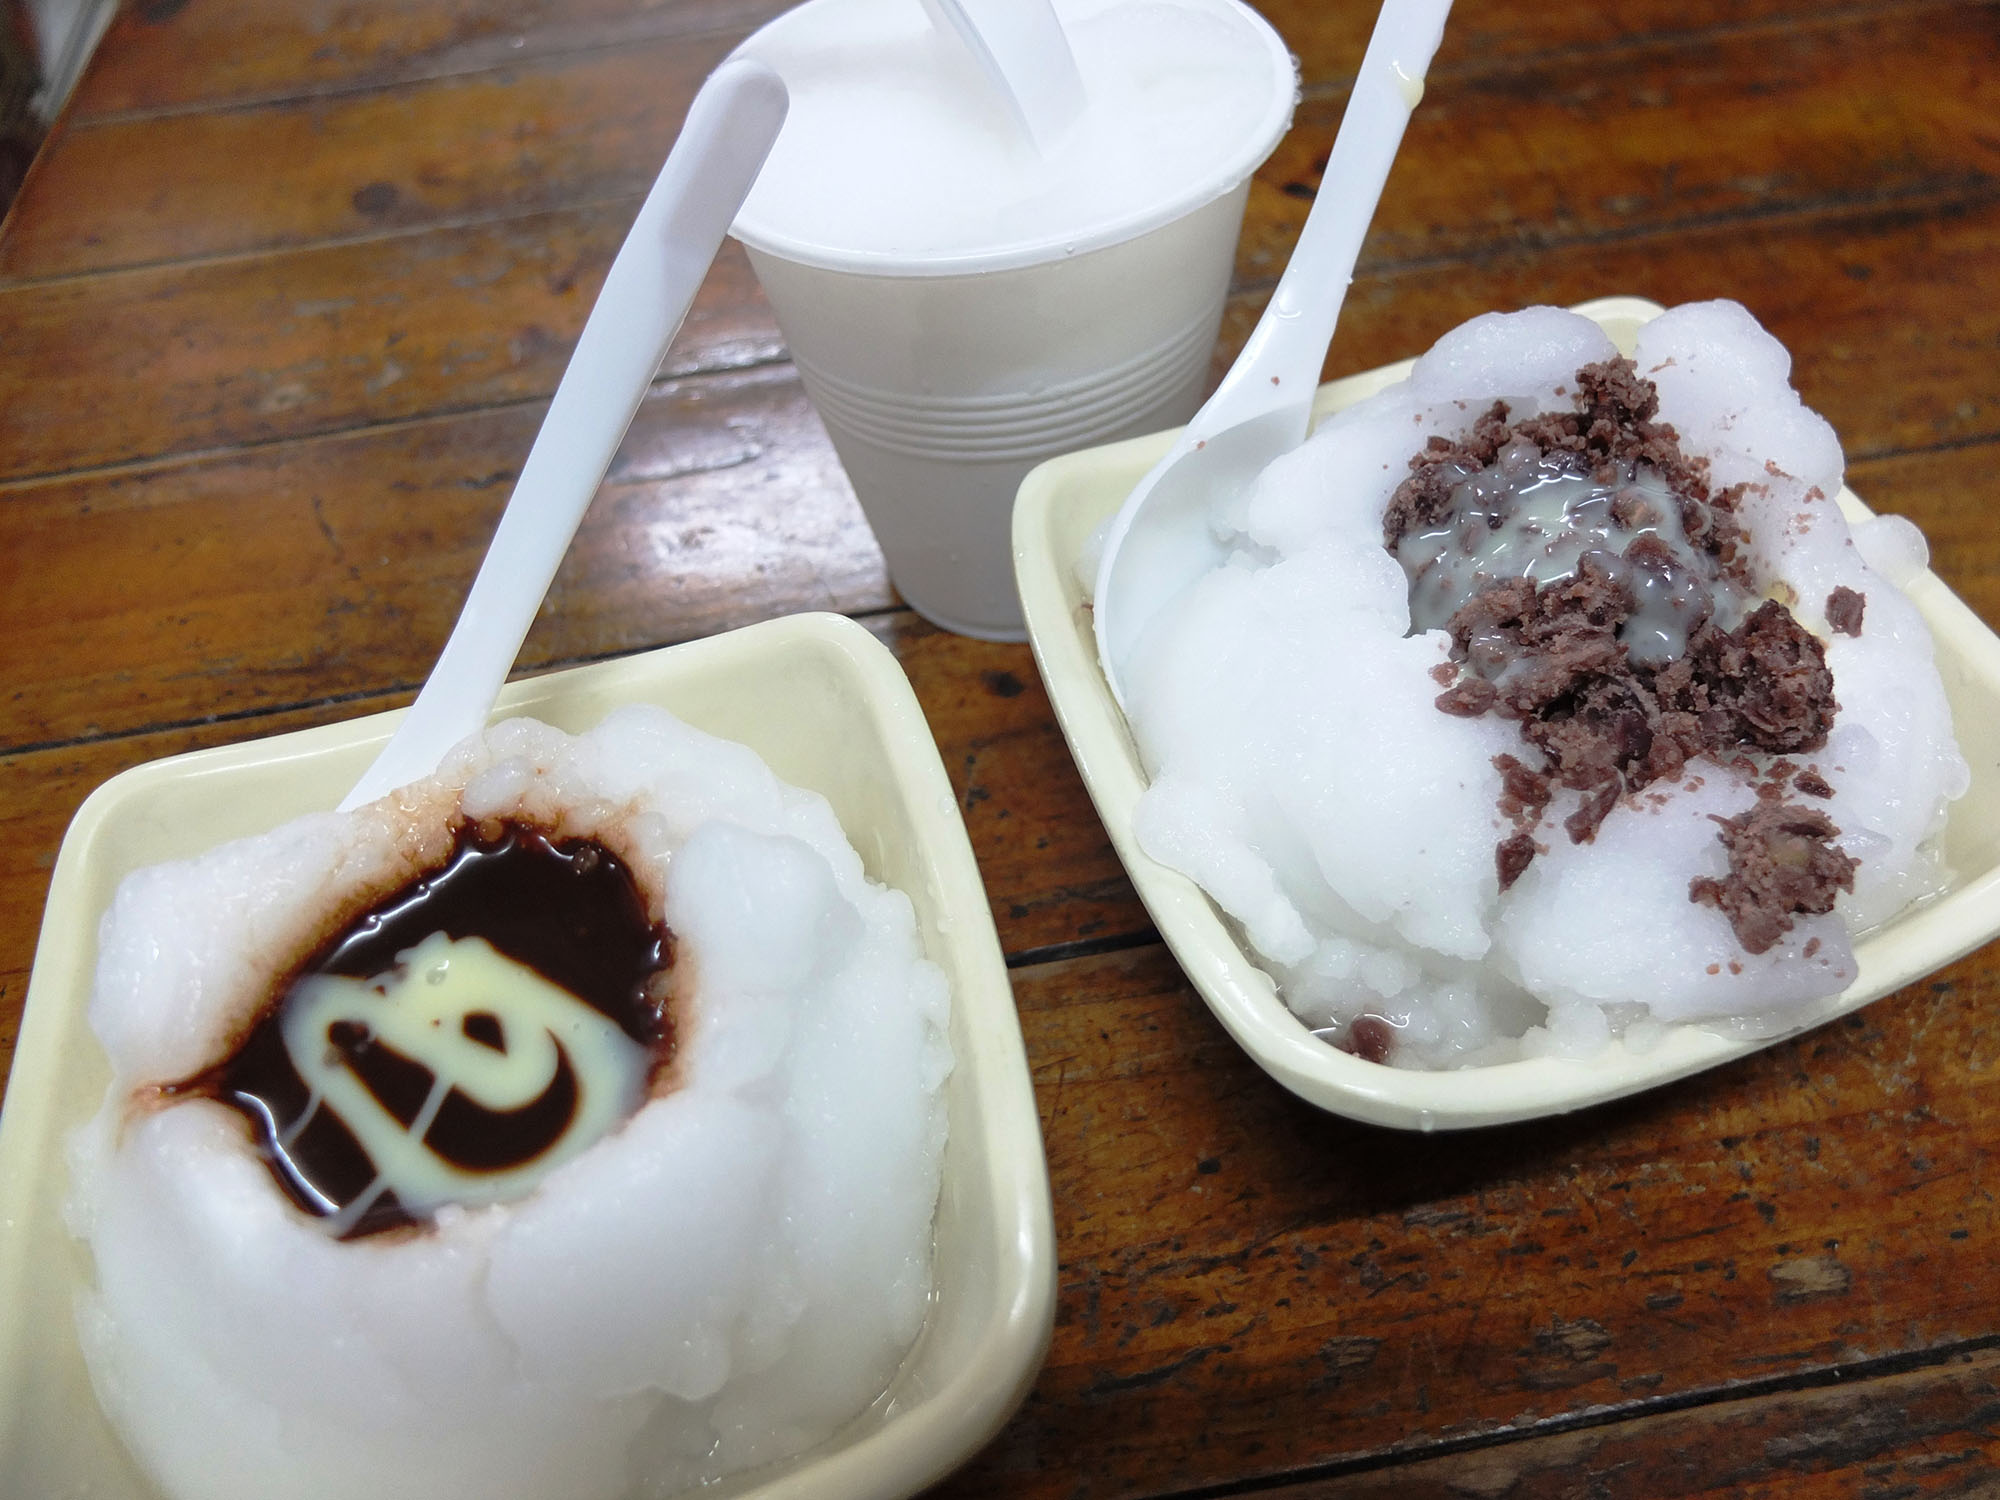 chocolate milk shaved ice, red bean milk shaved ice, and banana shaved ice